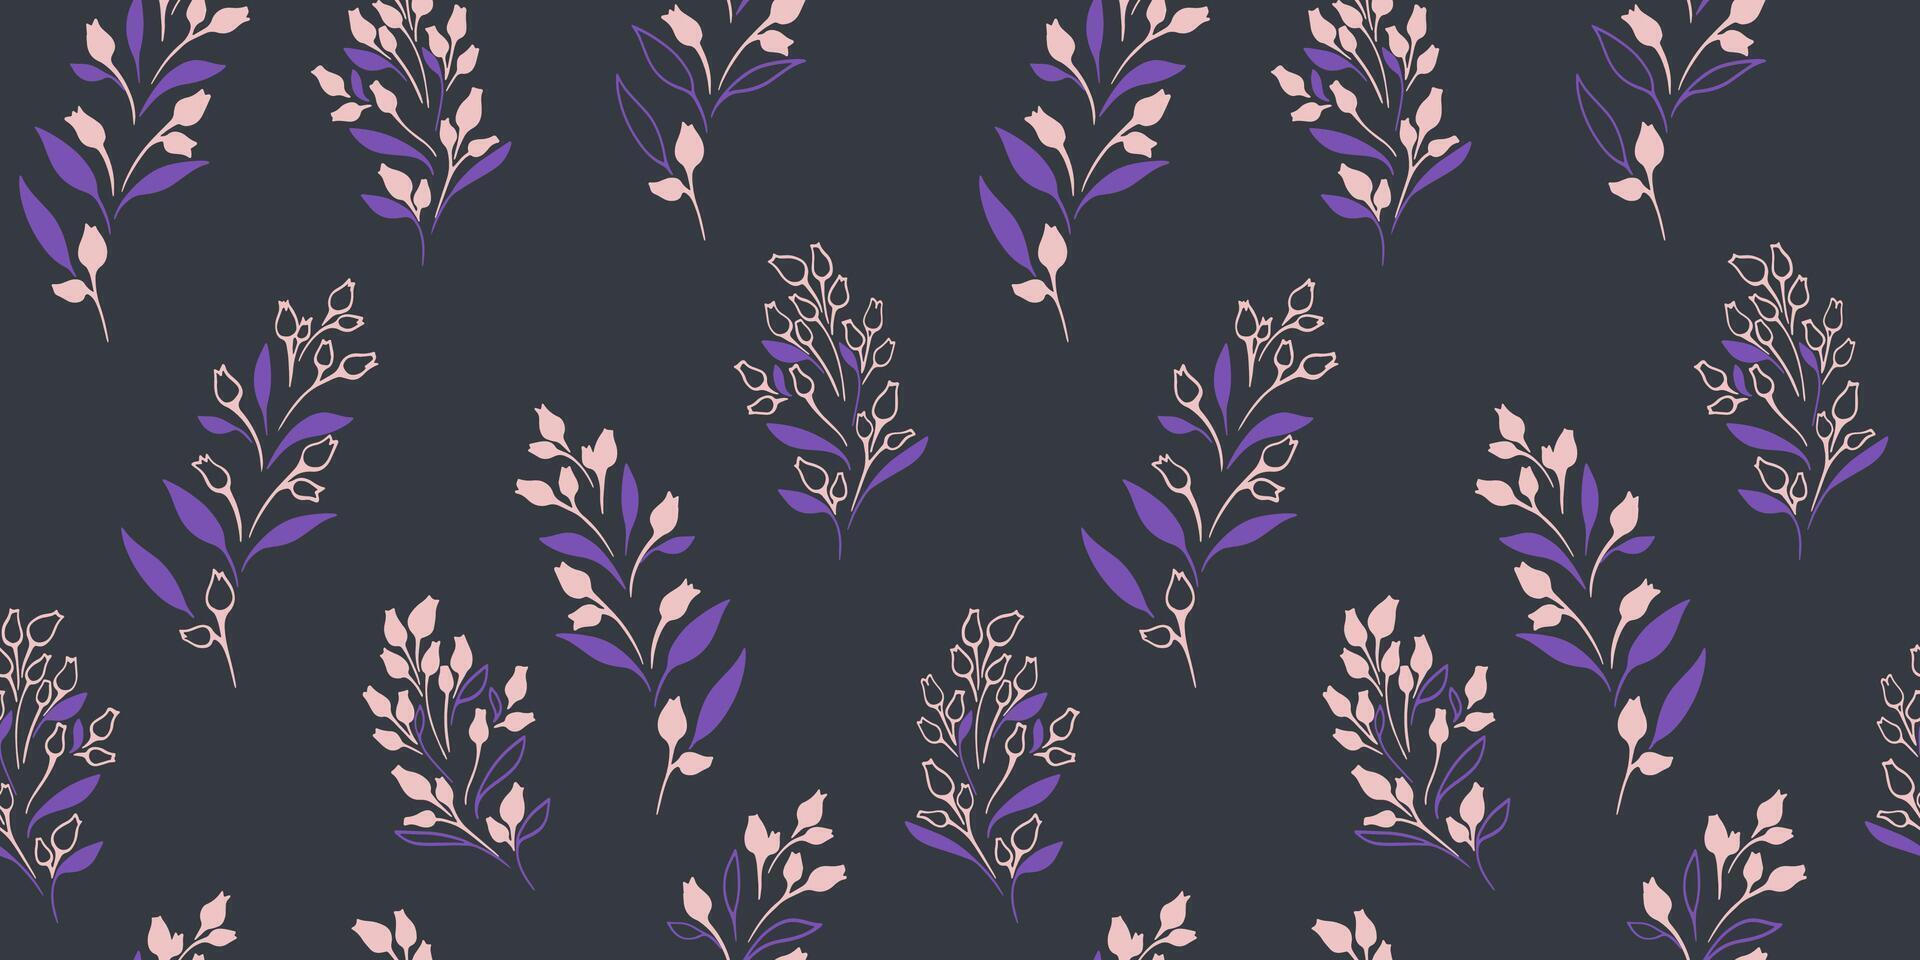 Seamless pattern with creative tiny branches leaves with abstract flowers buds. Minimalist, dark simple floral stem printing. hand drawn sketch. Template for designs, fashion, fabric, textile vector